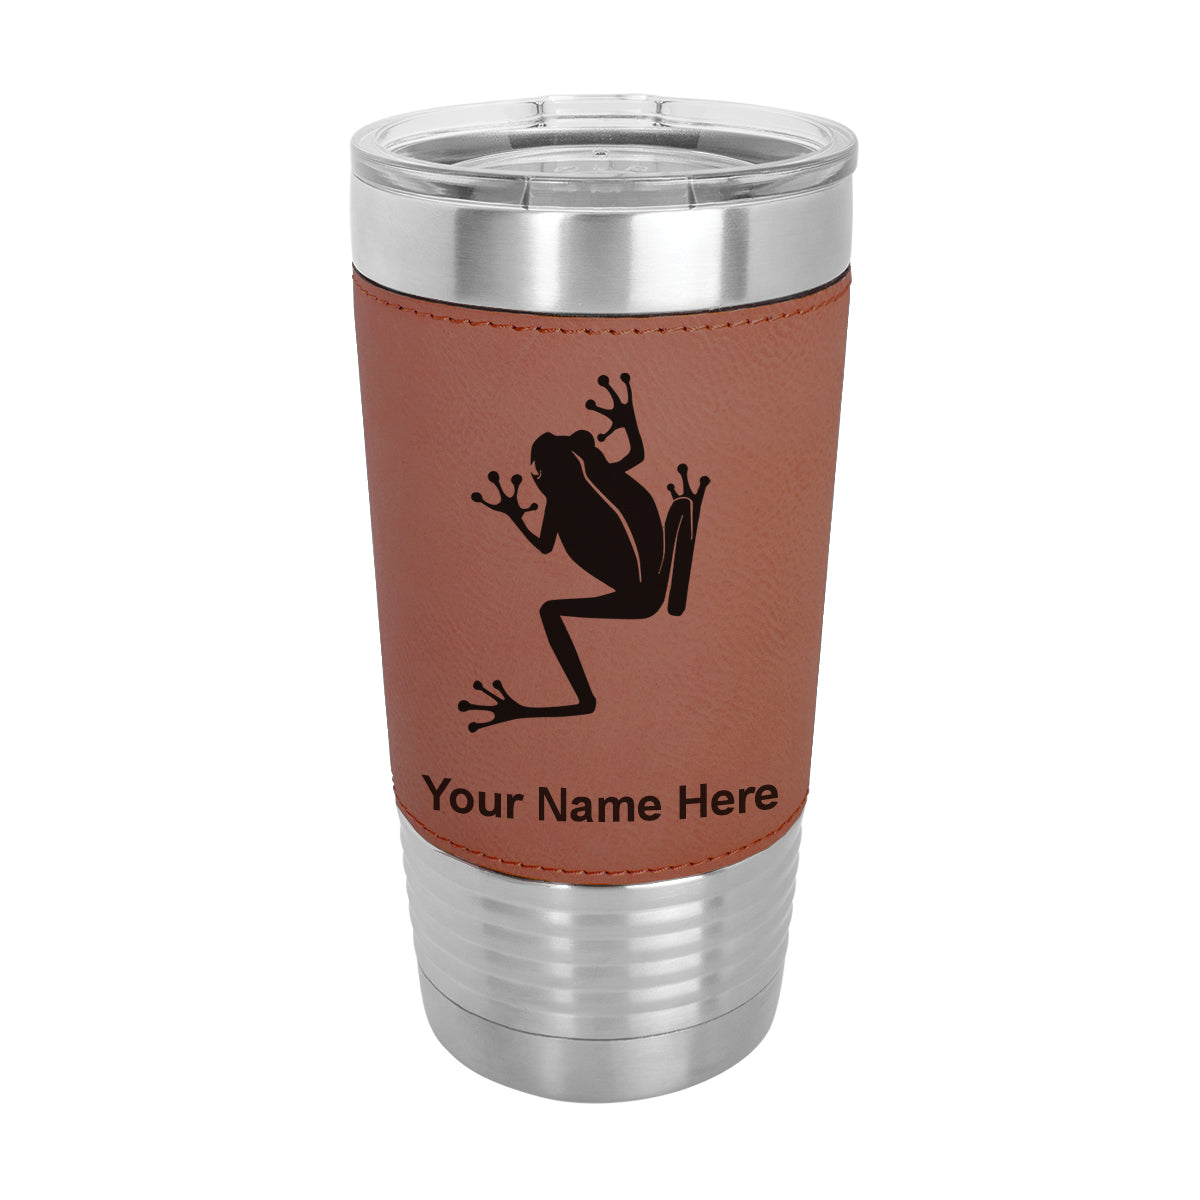 20oz Faux Leather Tumbler Mug, Tree Frog, Personalized Engraving Included